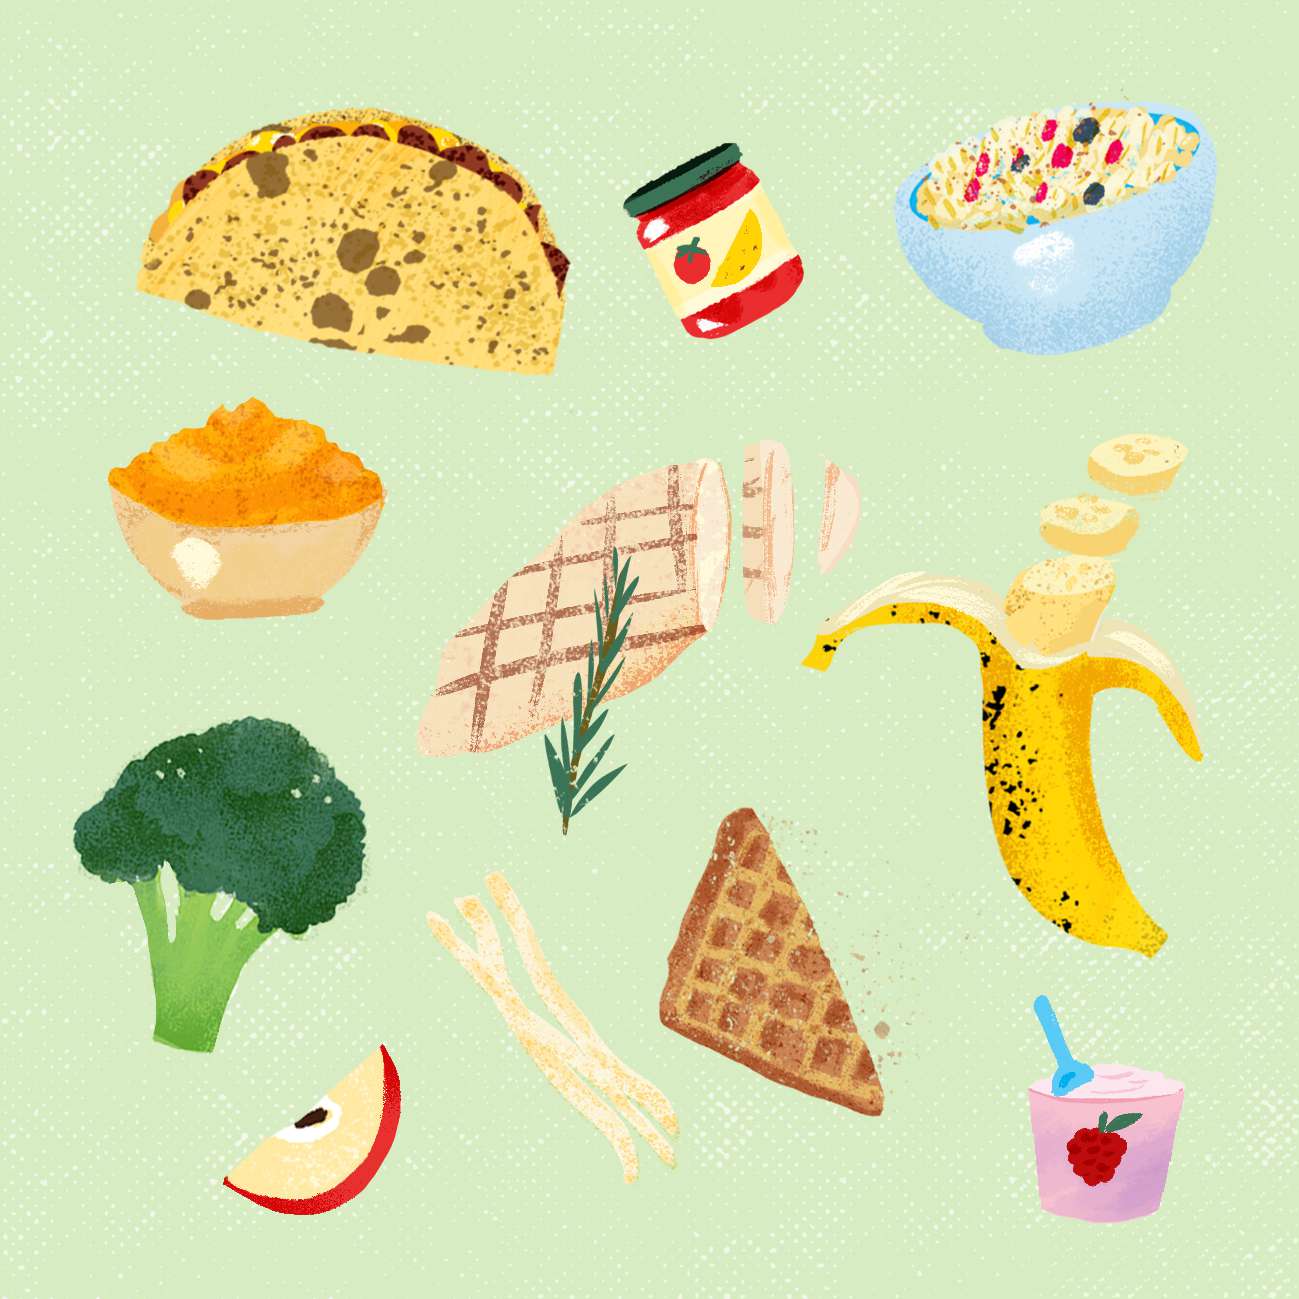 illustration of food items for ages 1-3